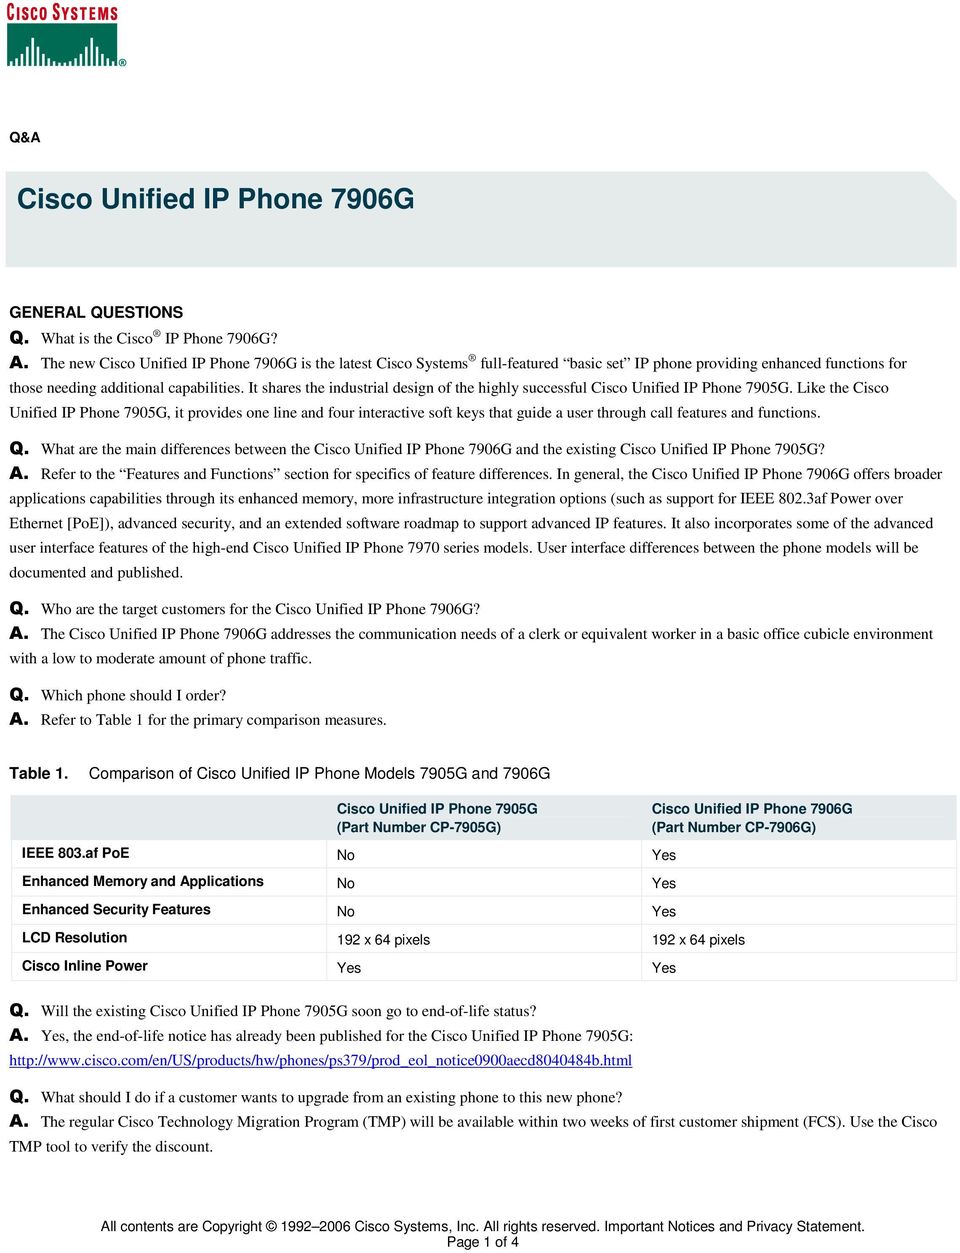 It shares the industrial design of the highly successful Cisco Unified IP Phone 7905G.